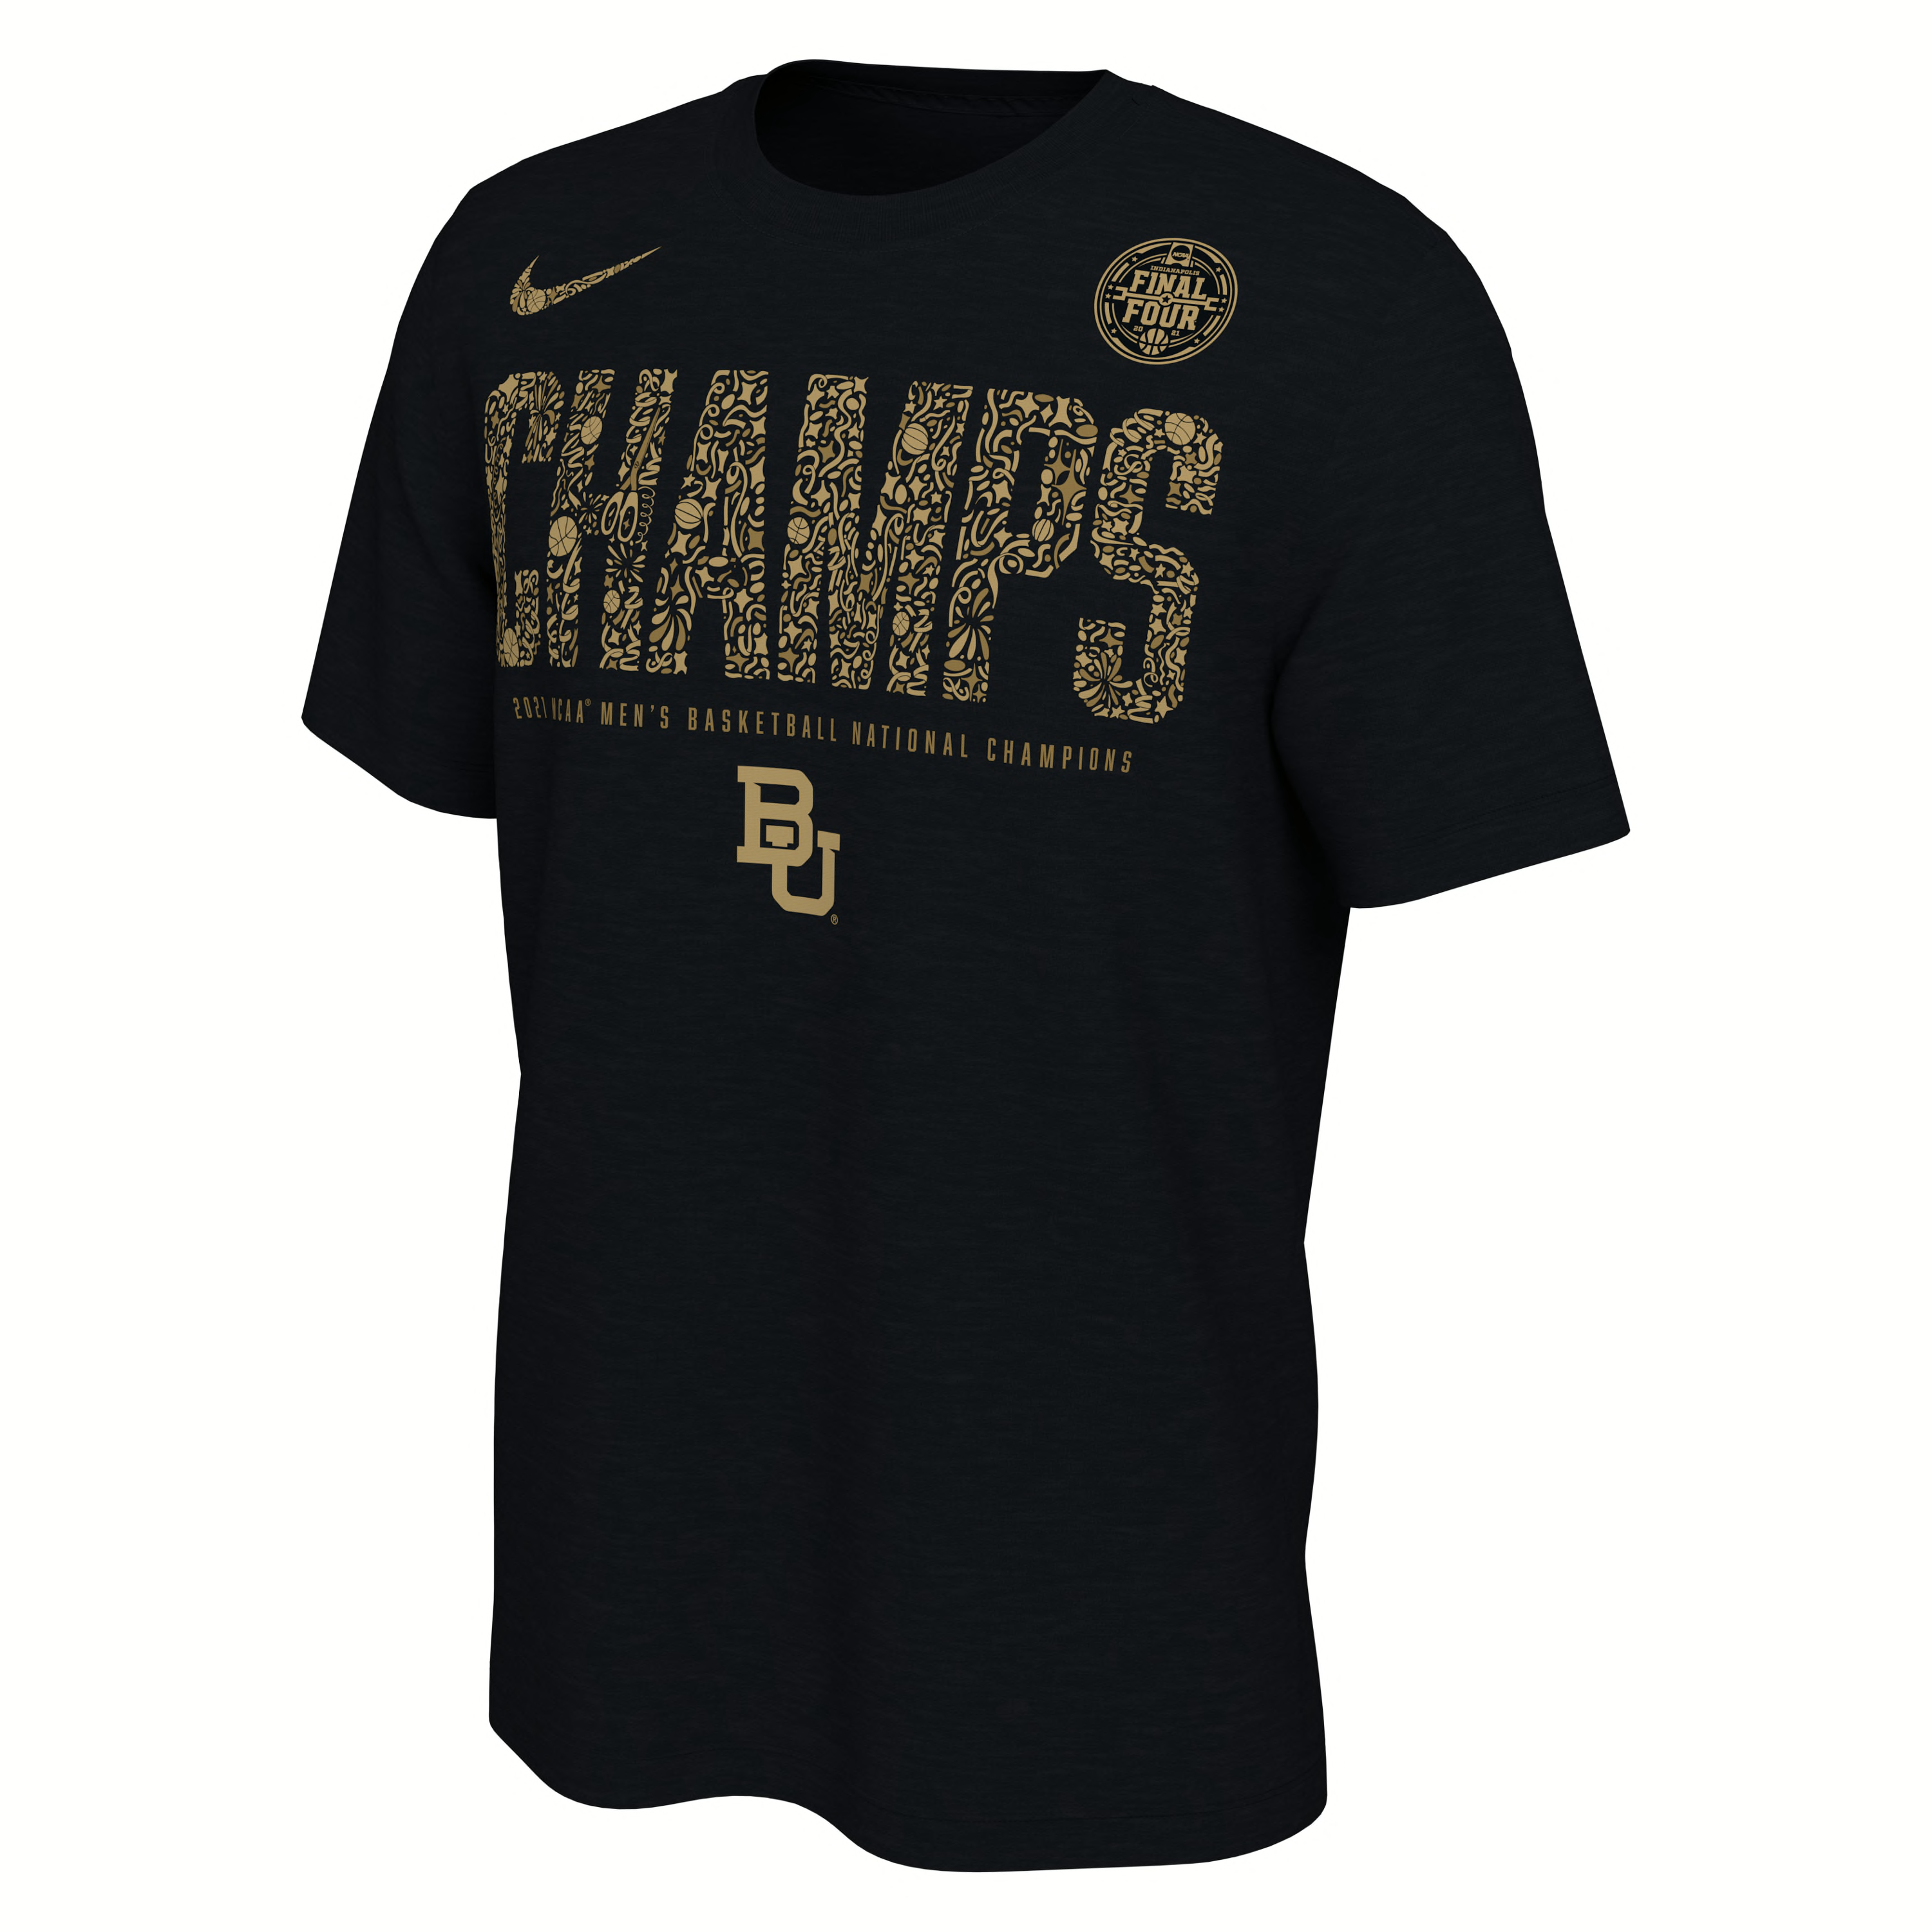 Champions! Baylor has won it all, so it's time to gear up!